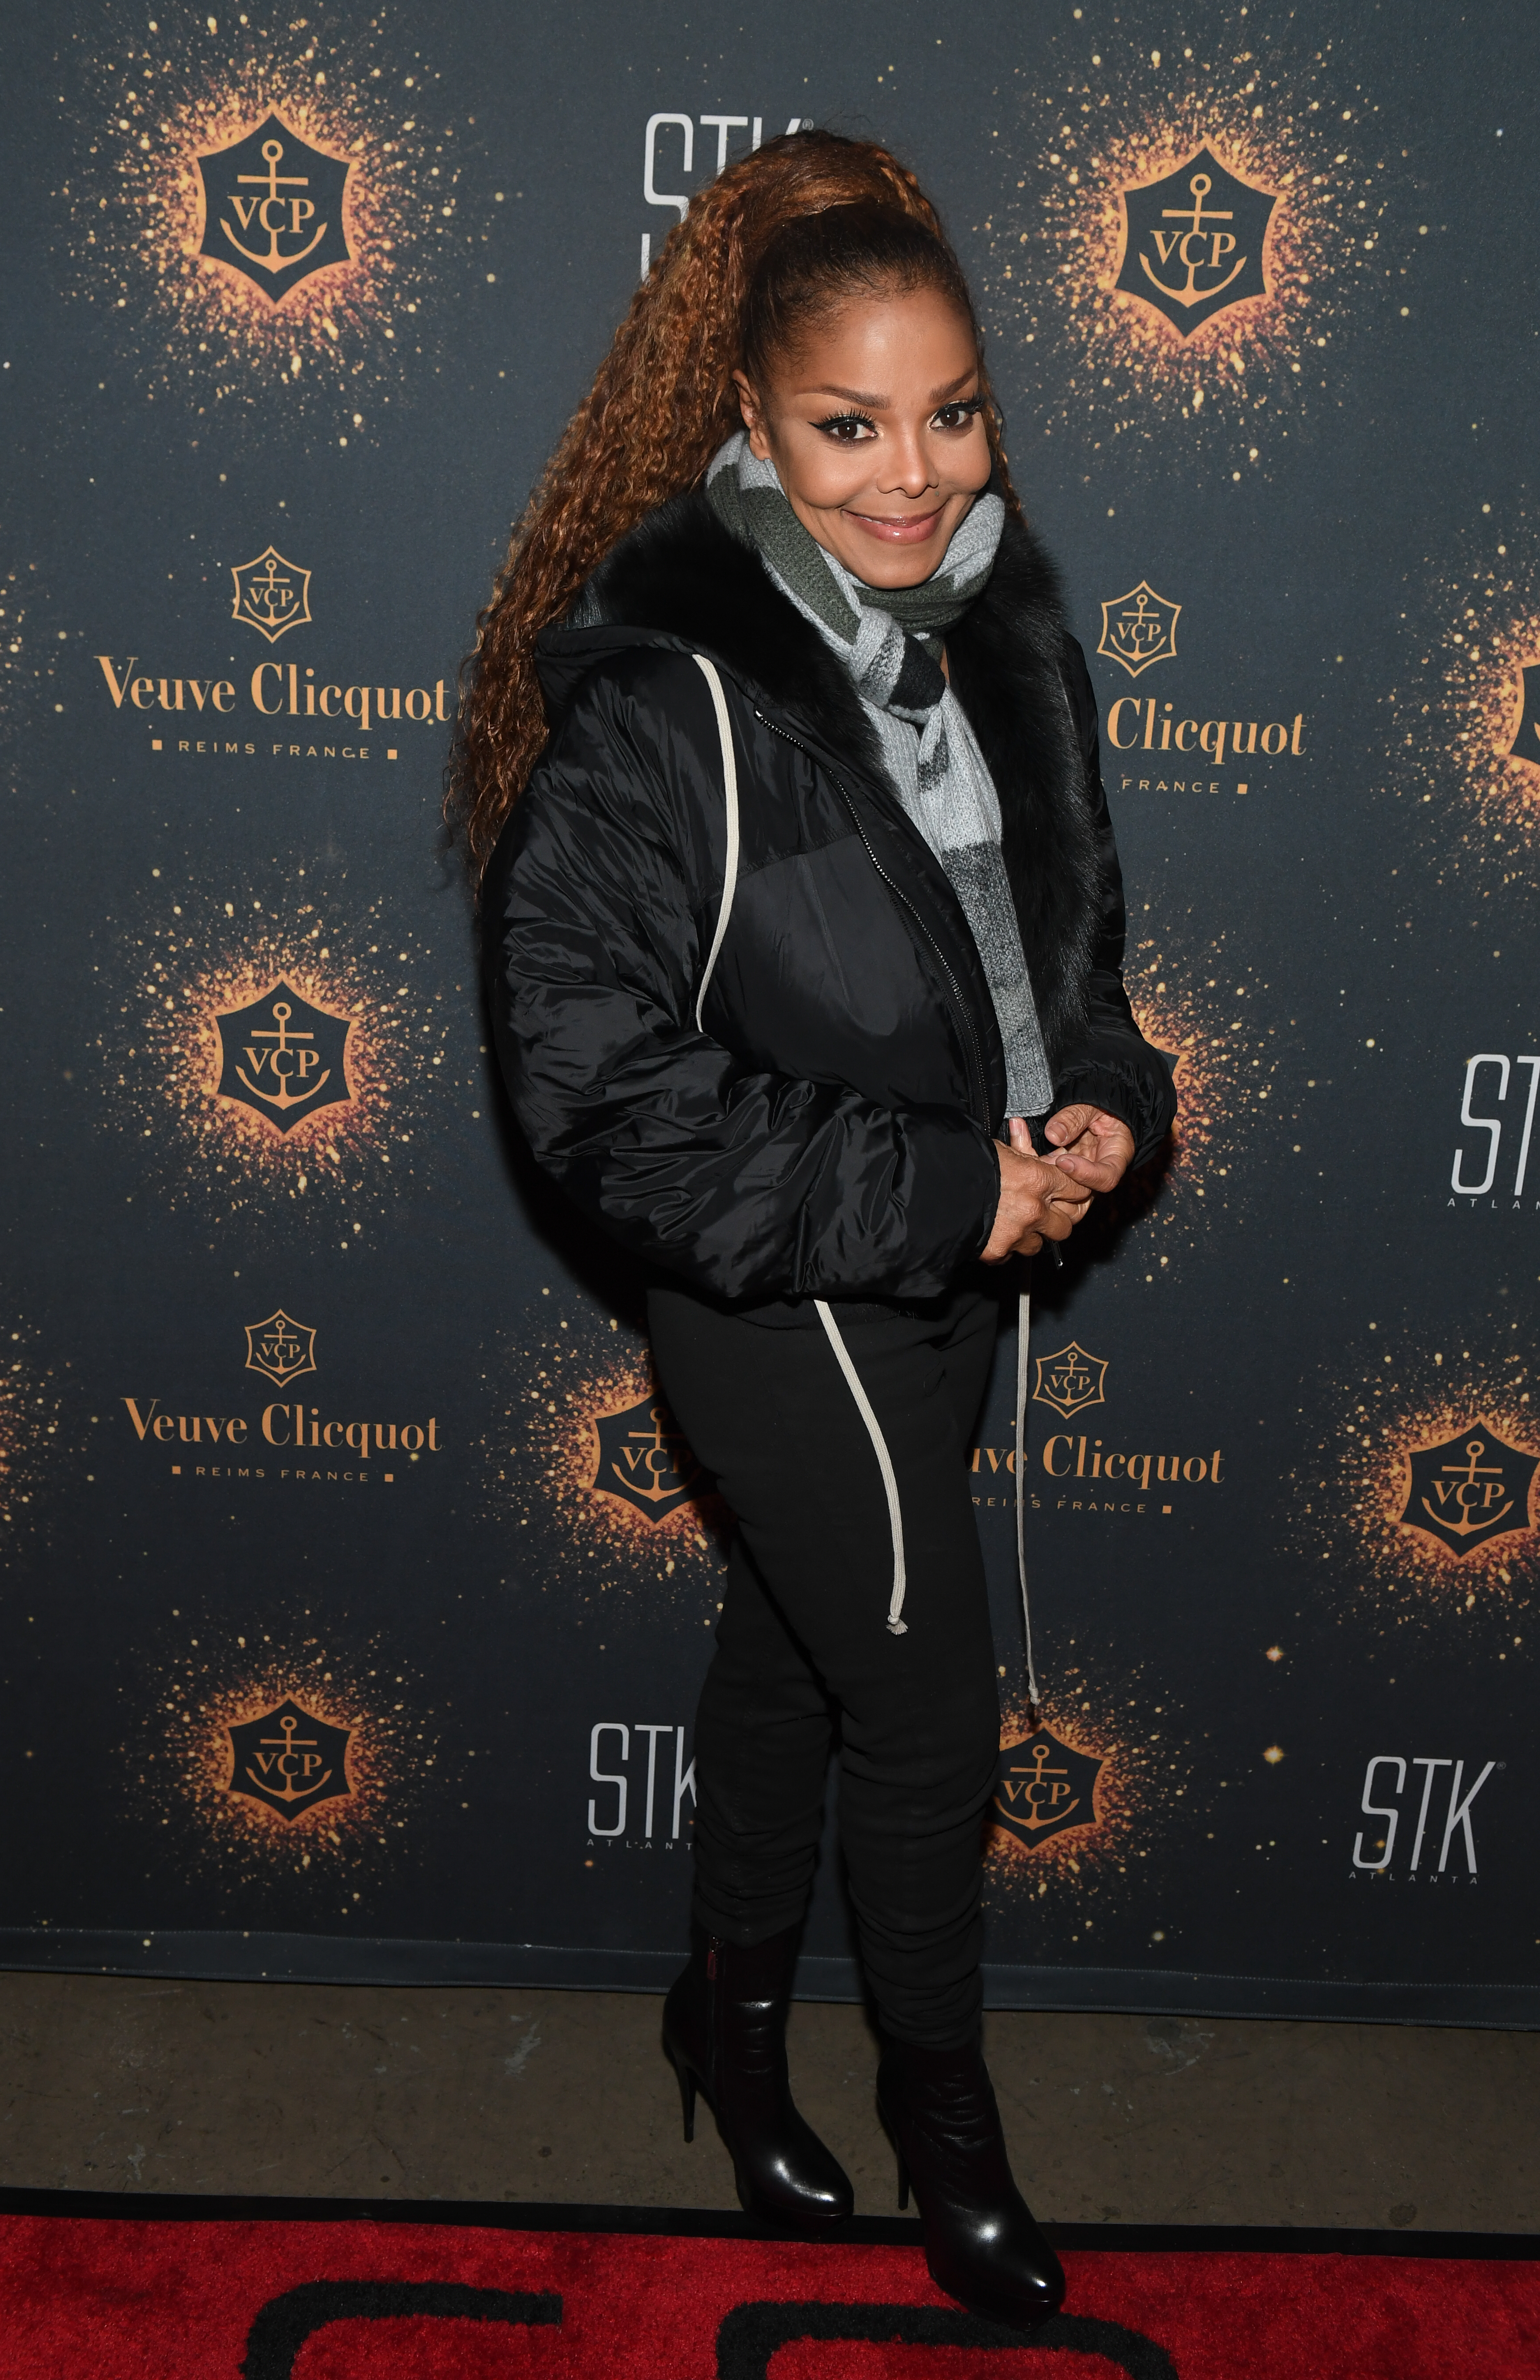 Janet Jackson in a puffy jacket and boots posing at an event